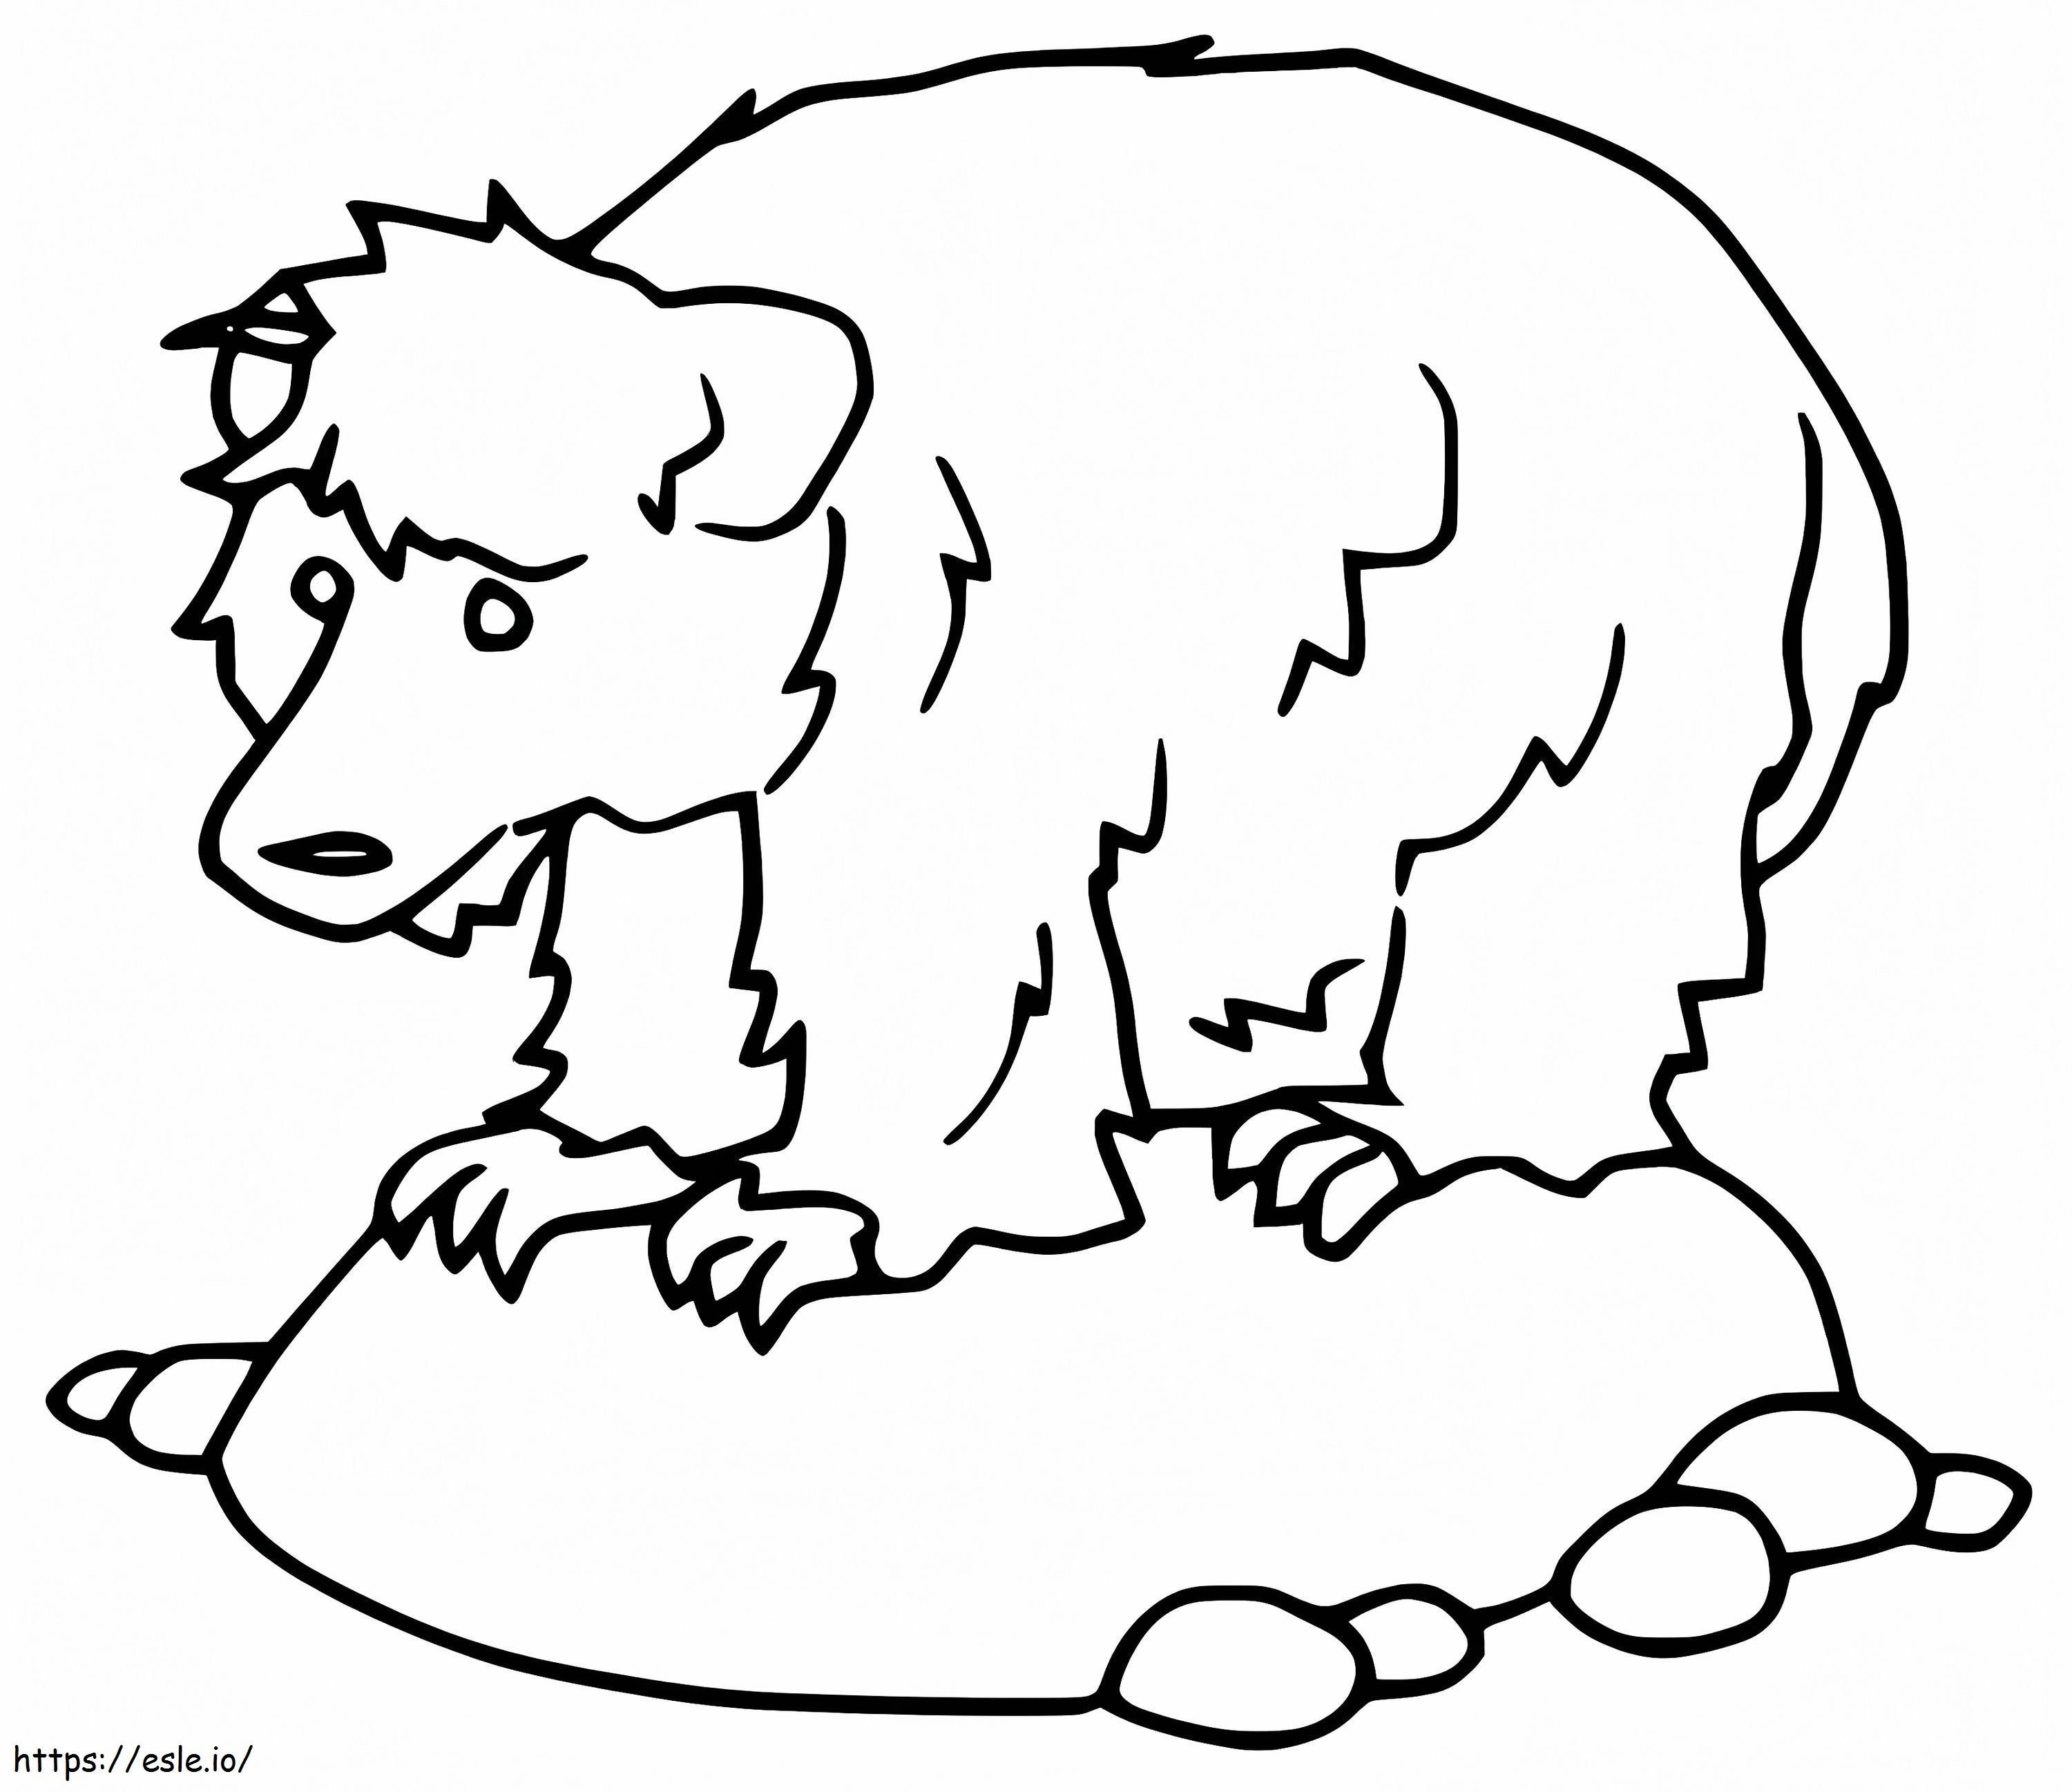 Sloth Standing On A Stone coloring page